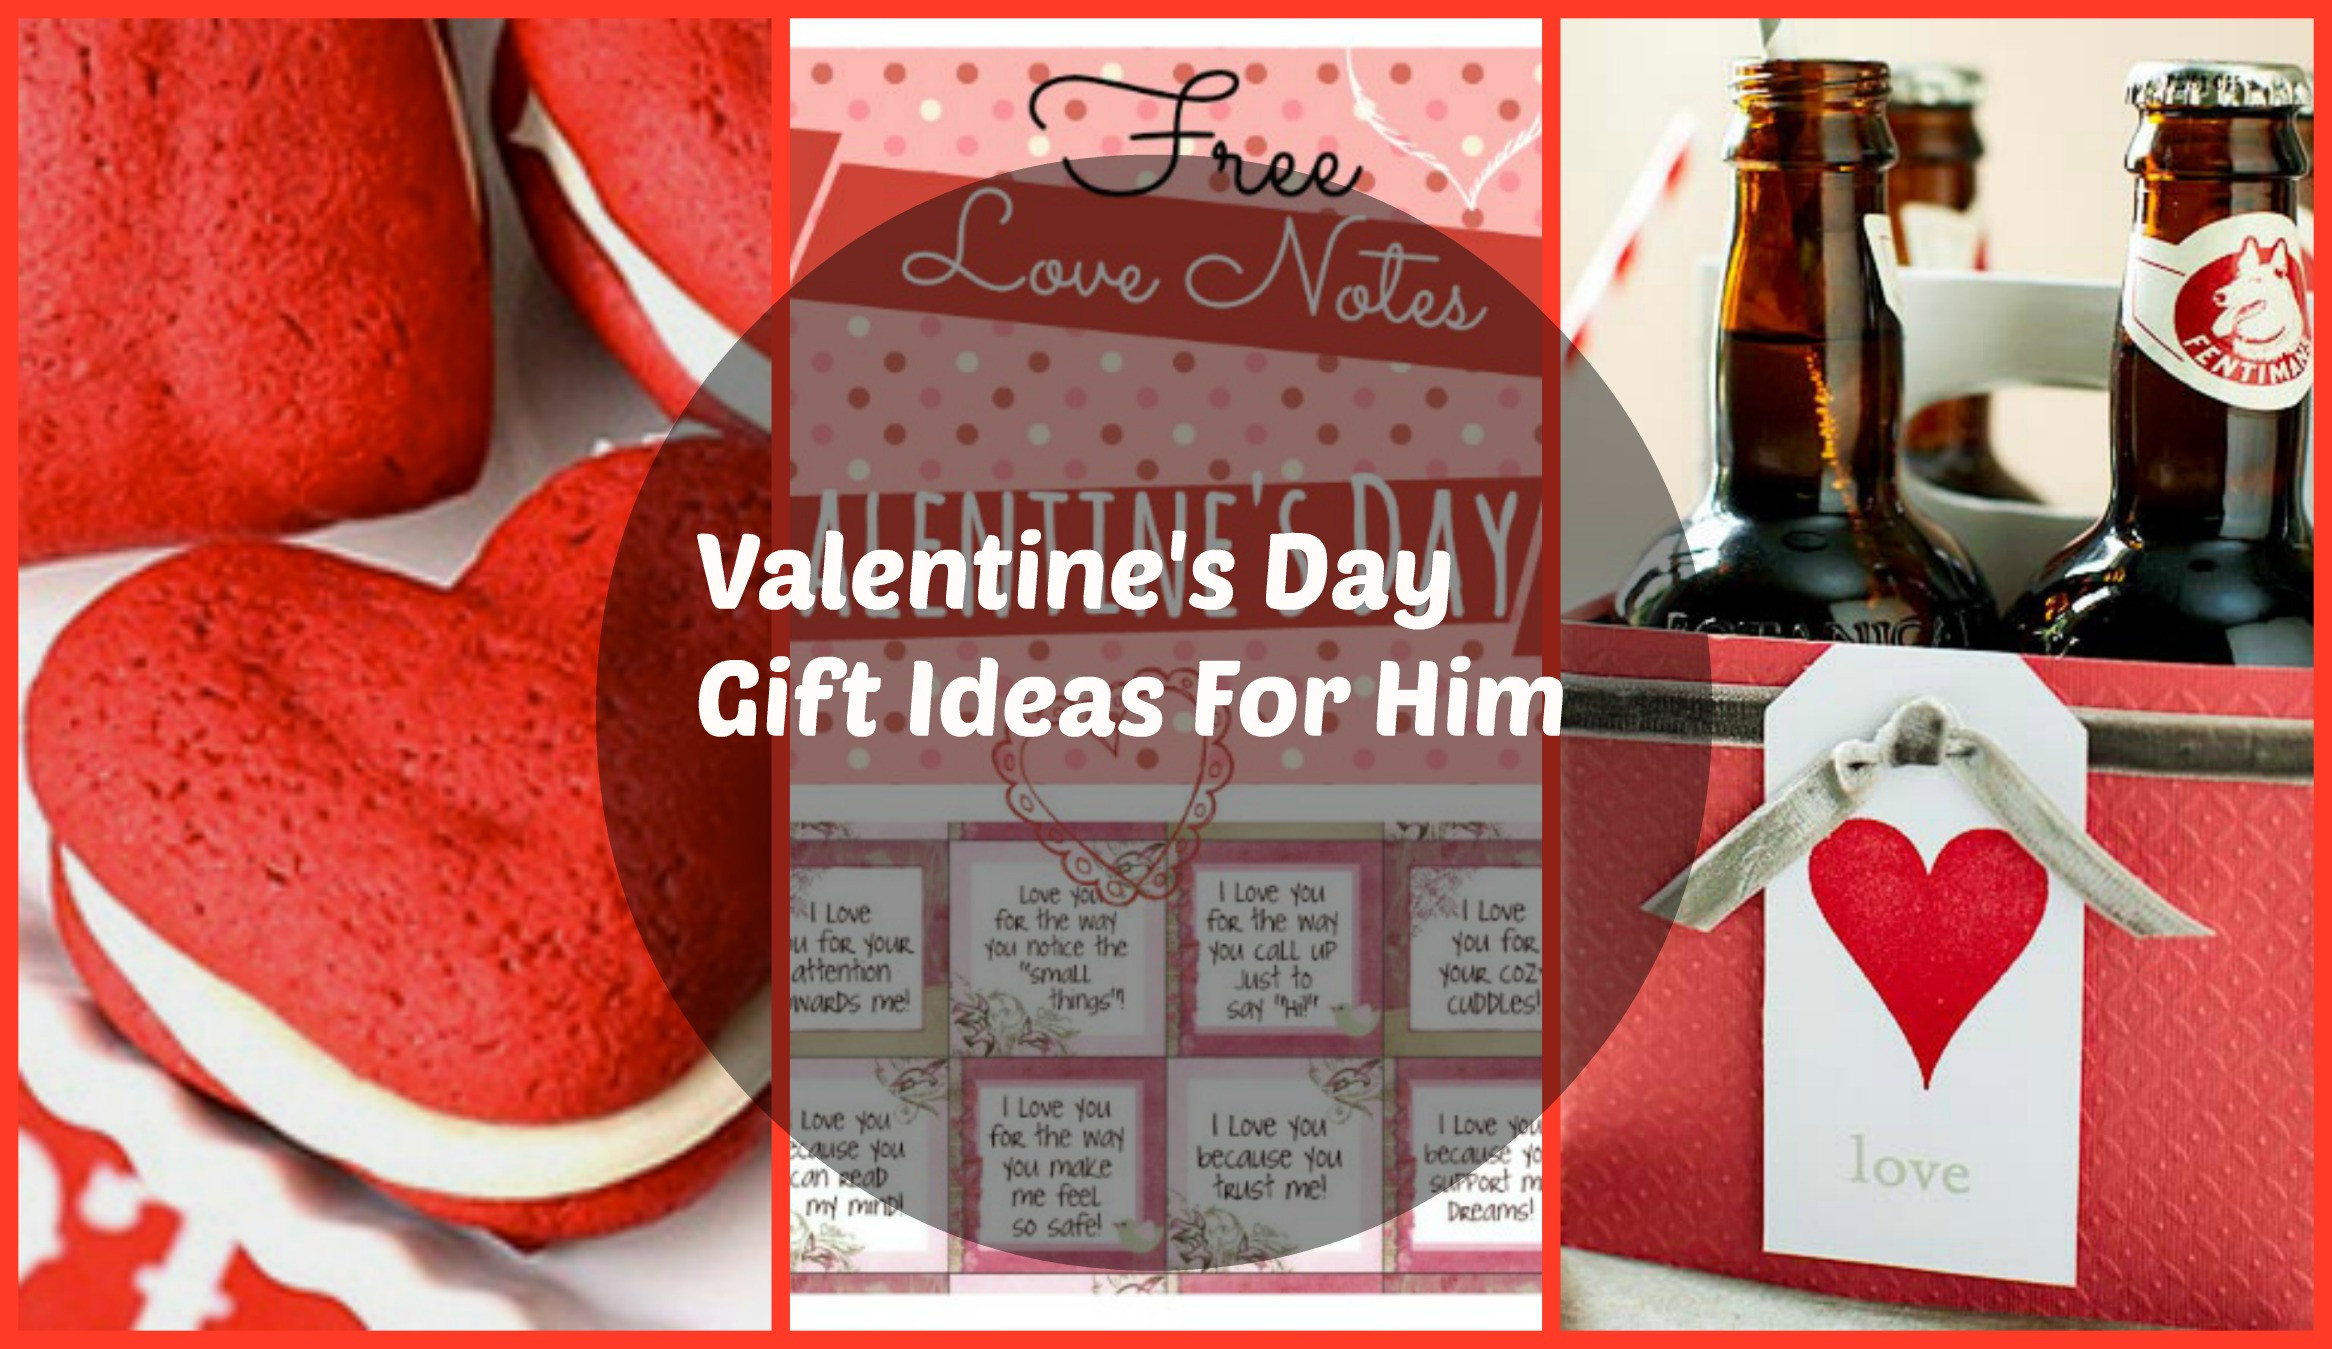 Gift Ideas For Him Valentines
 Valentine s Gift Ideas for Him Archives Fashion Trend Seeker